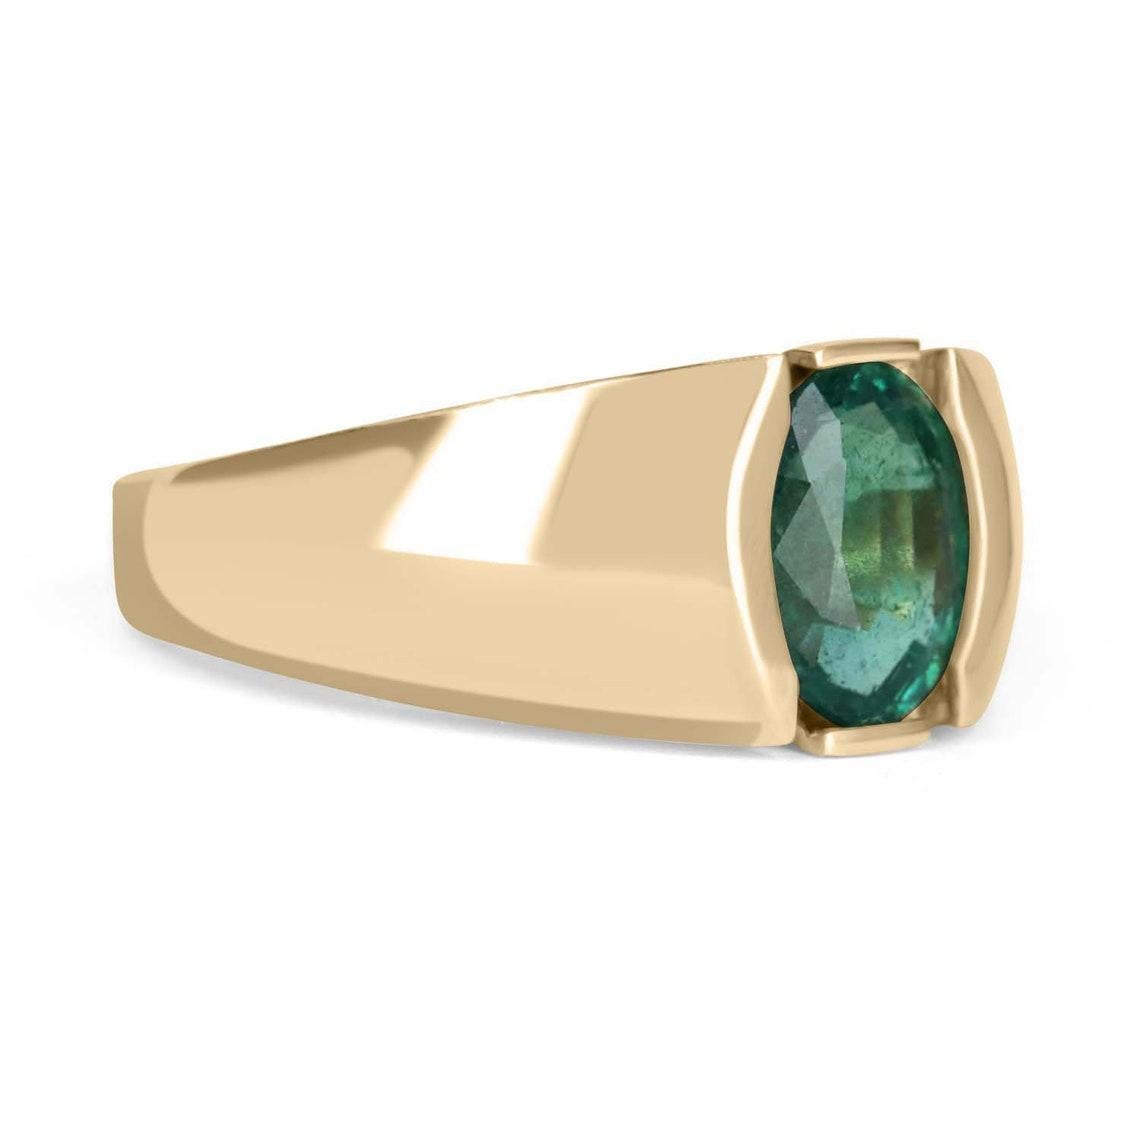 This is a simple and sophisticated unisex emerald ring. The emerald carries a full 2.08-carats and showcases a dark green color, with a bluish-green undertone. It is set in a simple and secure, 14k yellow gold tension setting. The perfect